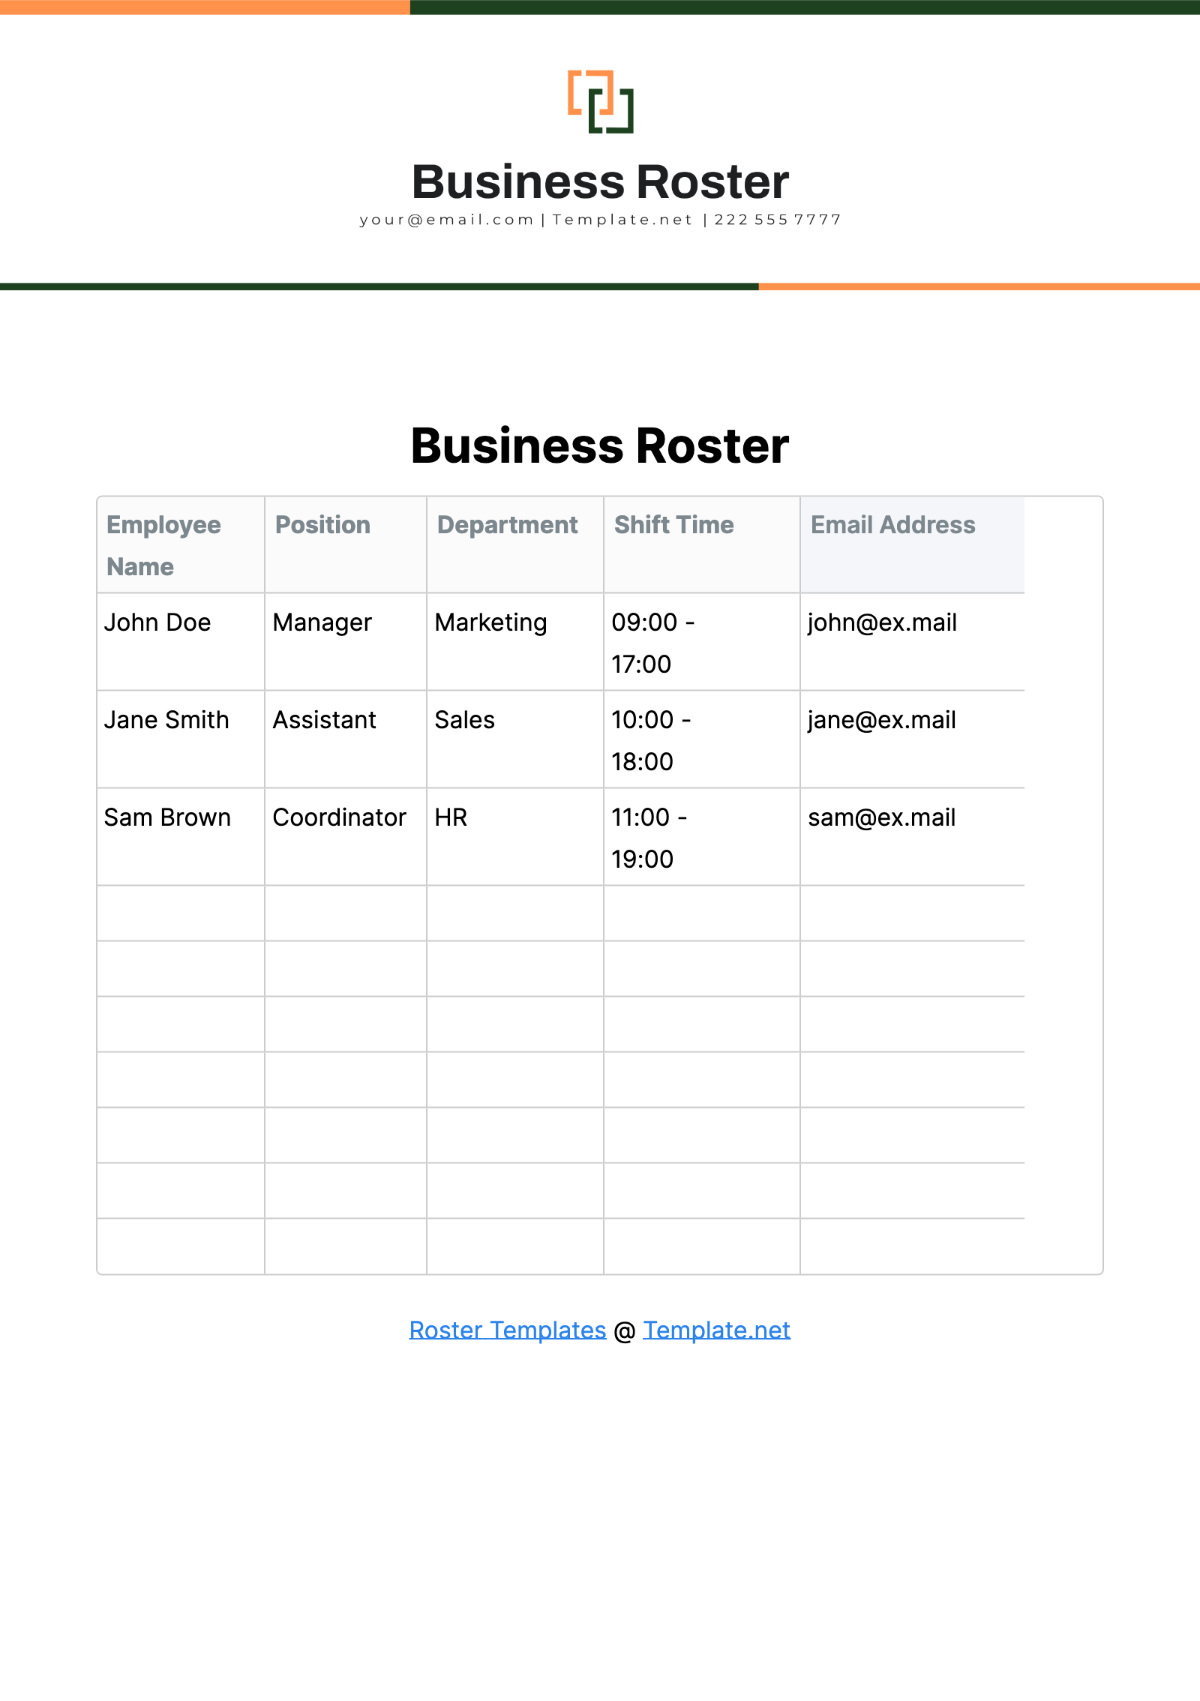 Business Roster Template